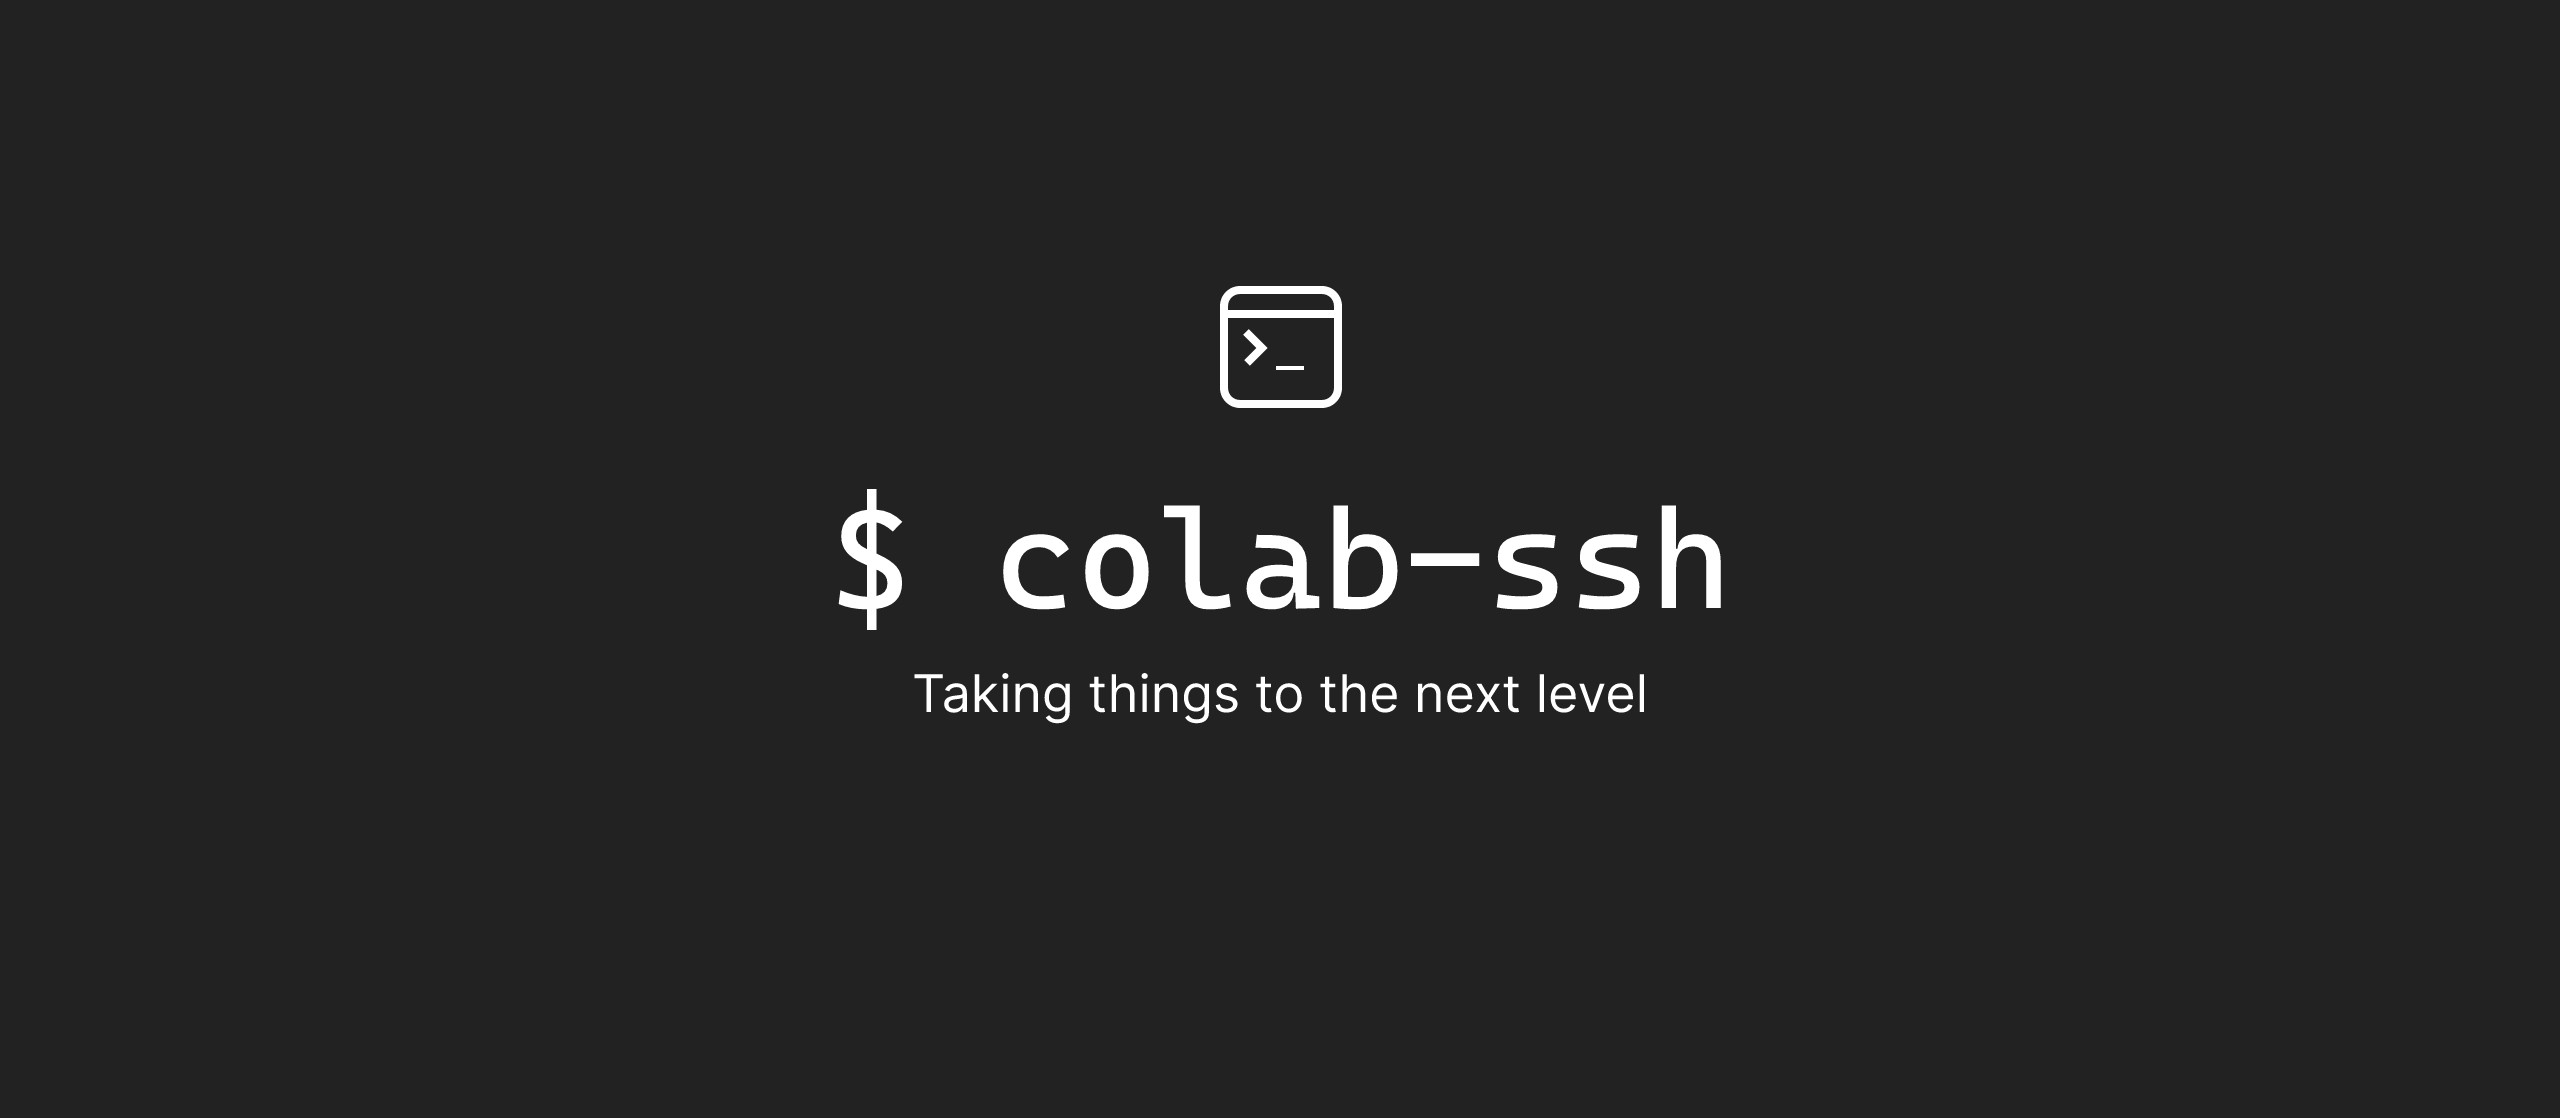 Cover photo of Colab-ssh